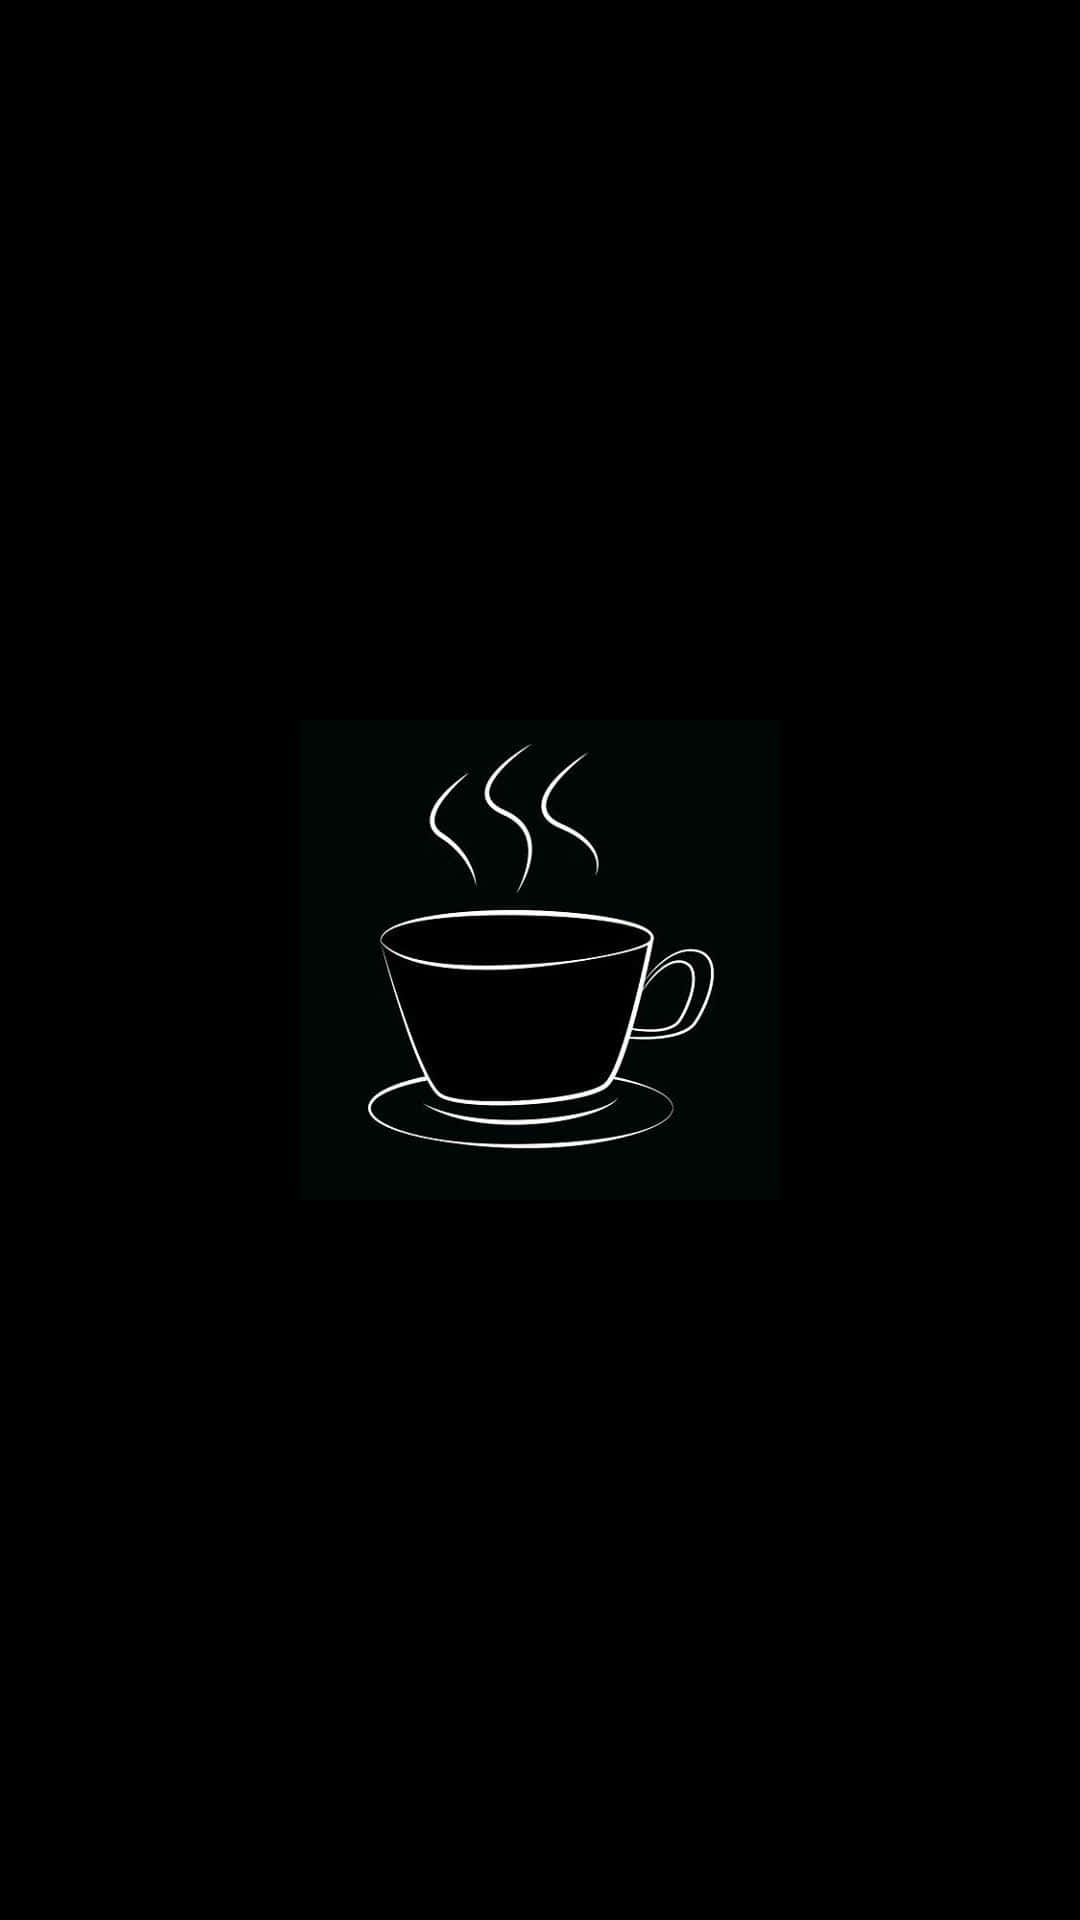 Wake up to a cup of black coffee Wallpaper